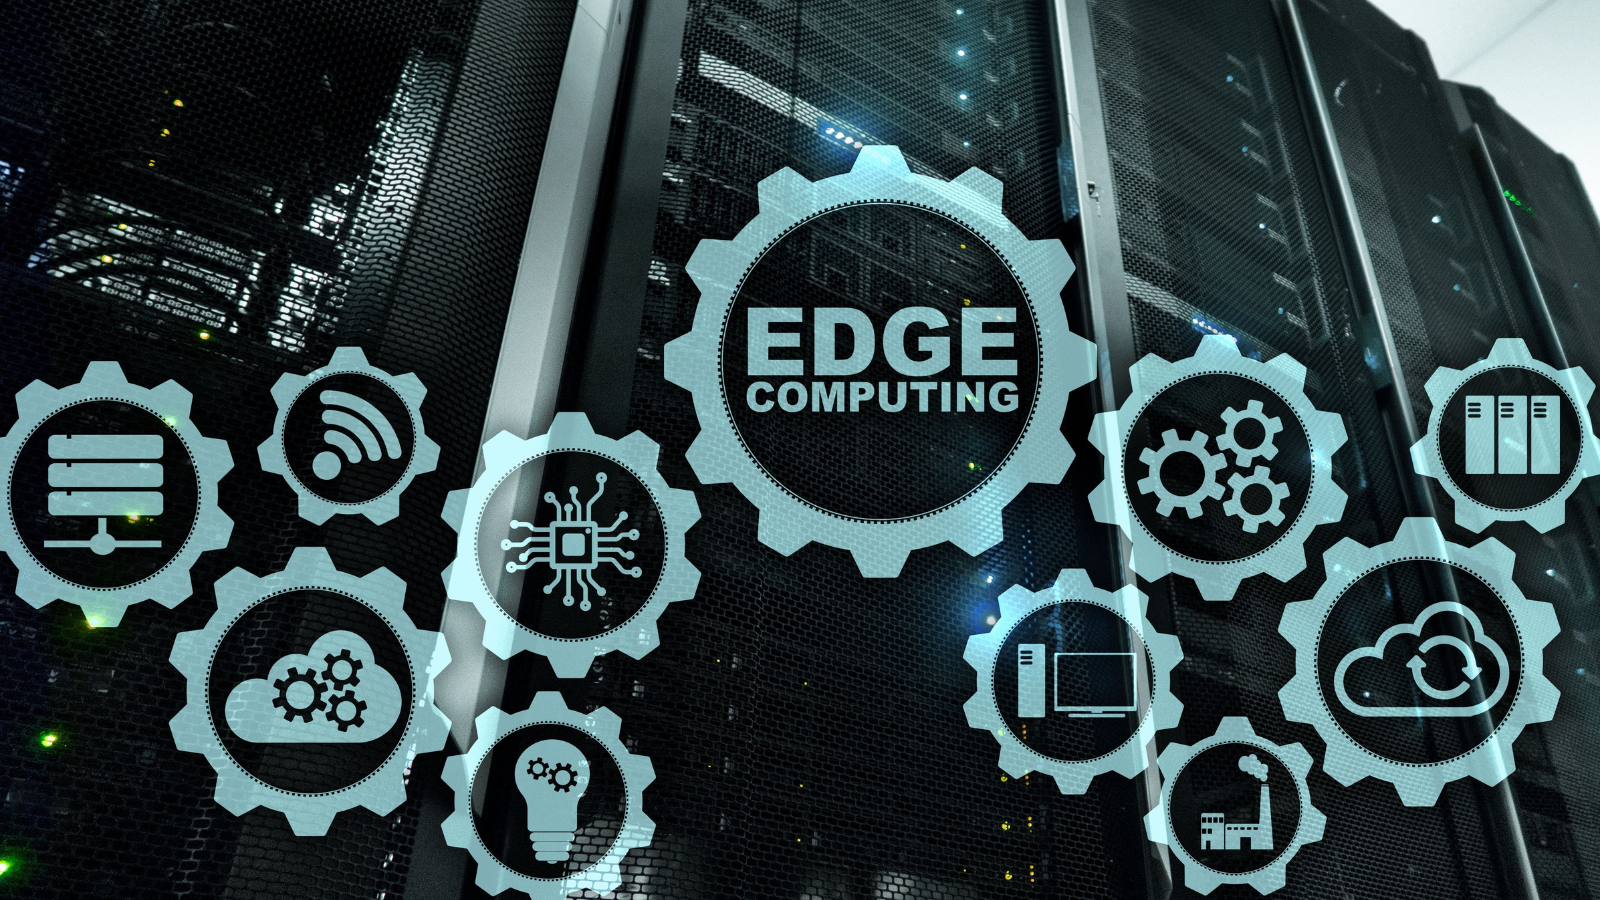 This report aims to help entities in the industrial sector to adopt the appropriate preventive measures in the event that they want to implement an Edge Computing architecture.